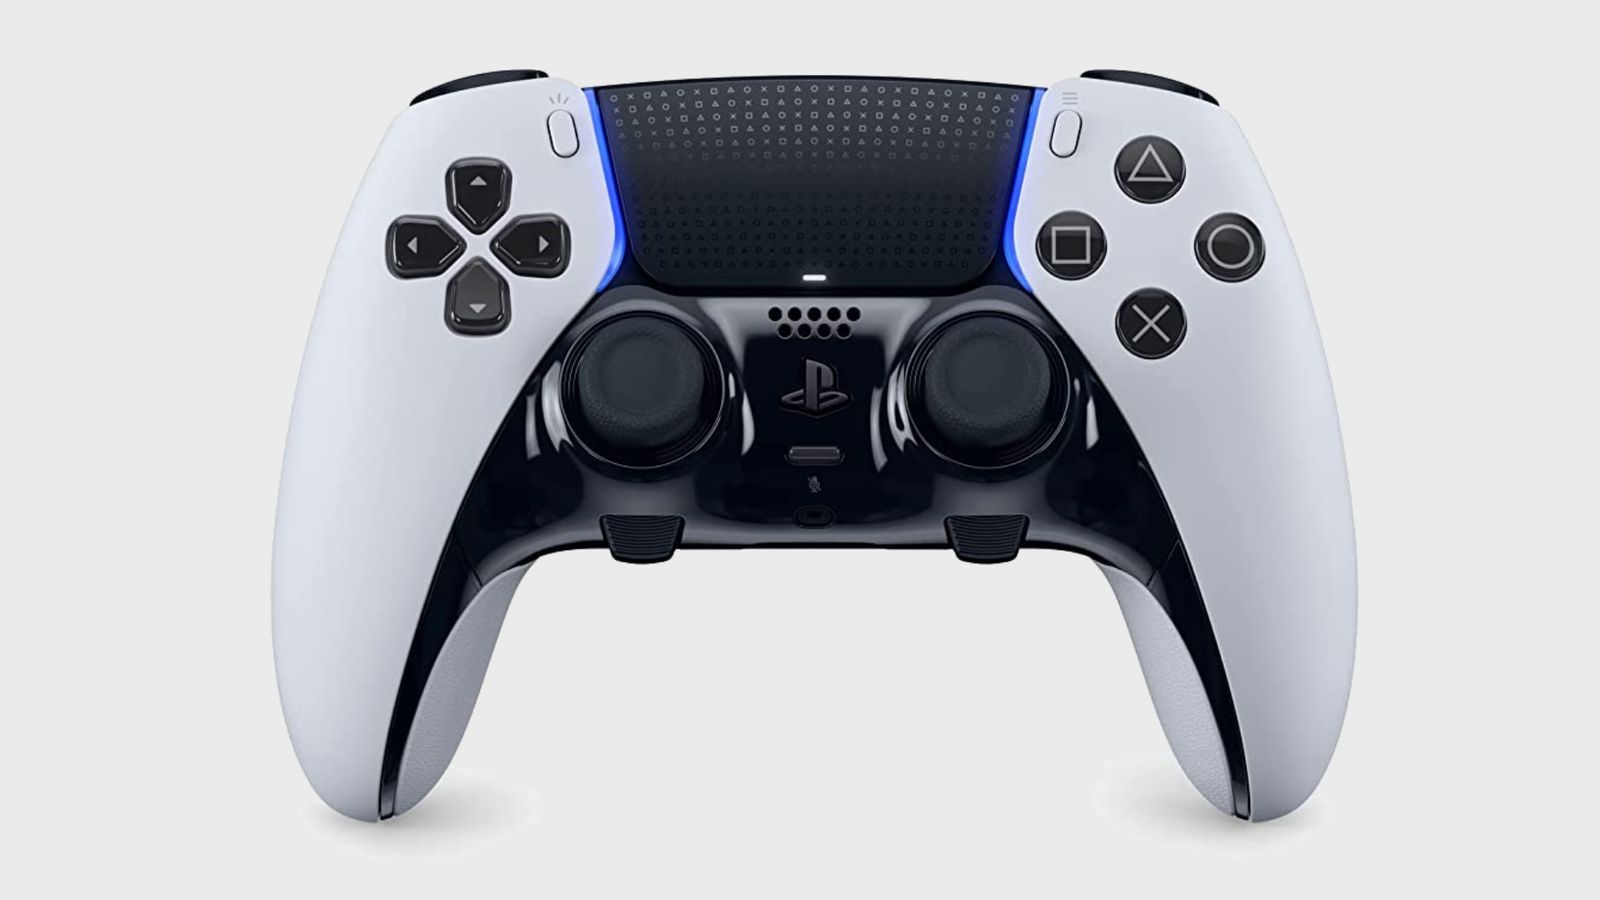 PlayStation DualSense Edge product image of a white and black gamepad featuring blue lighting.